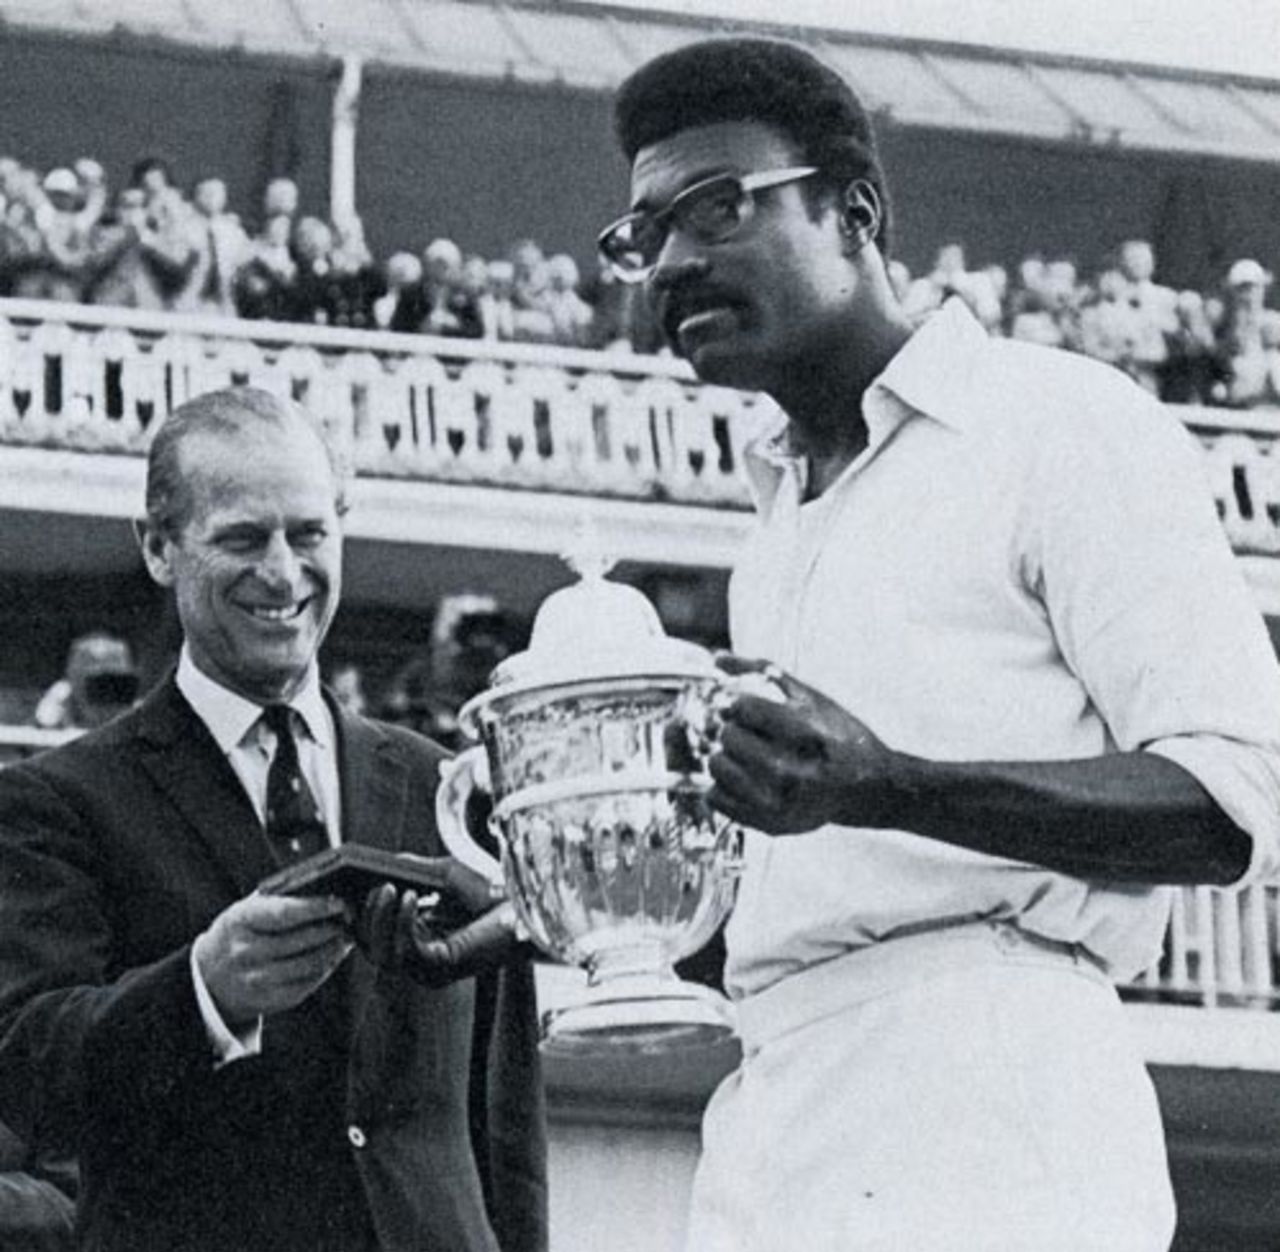 Clive Lloyd holds the World Cup after West Indies win in 1975, West Indies v Australia, Lord's, June 21, 1975